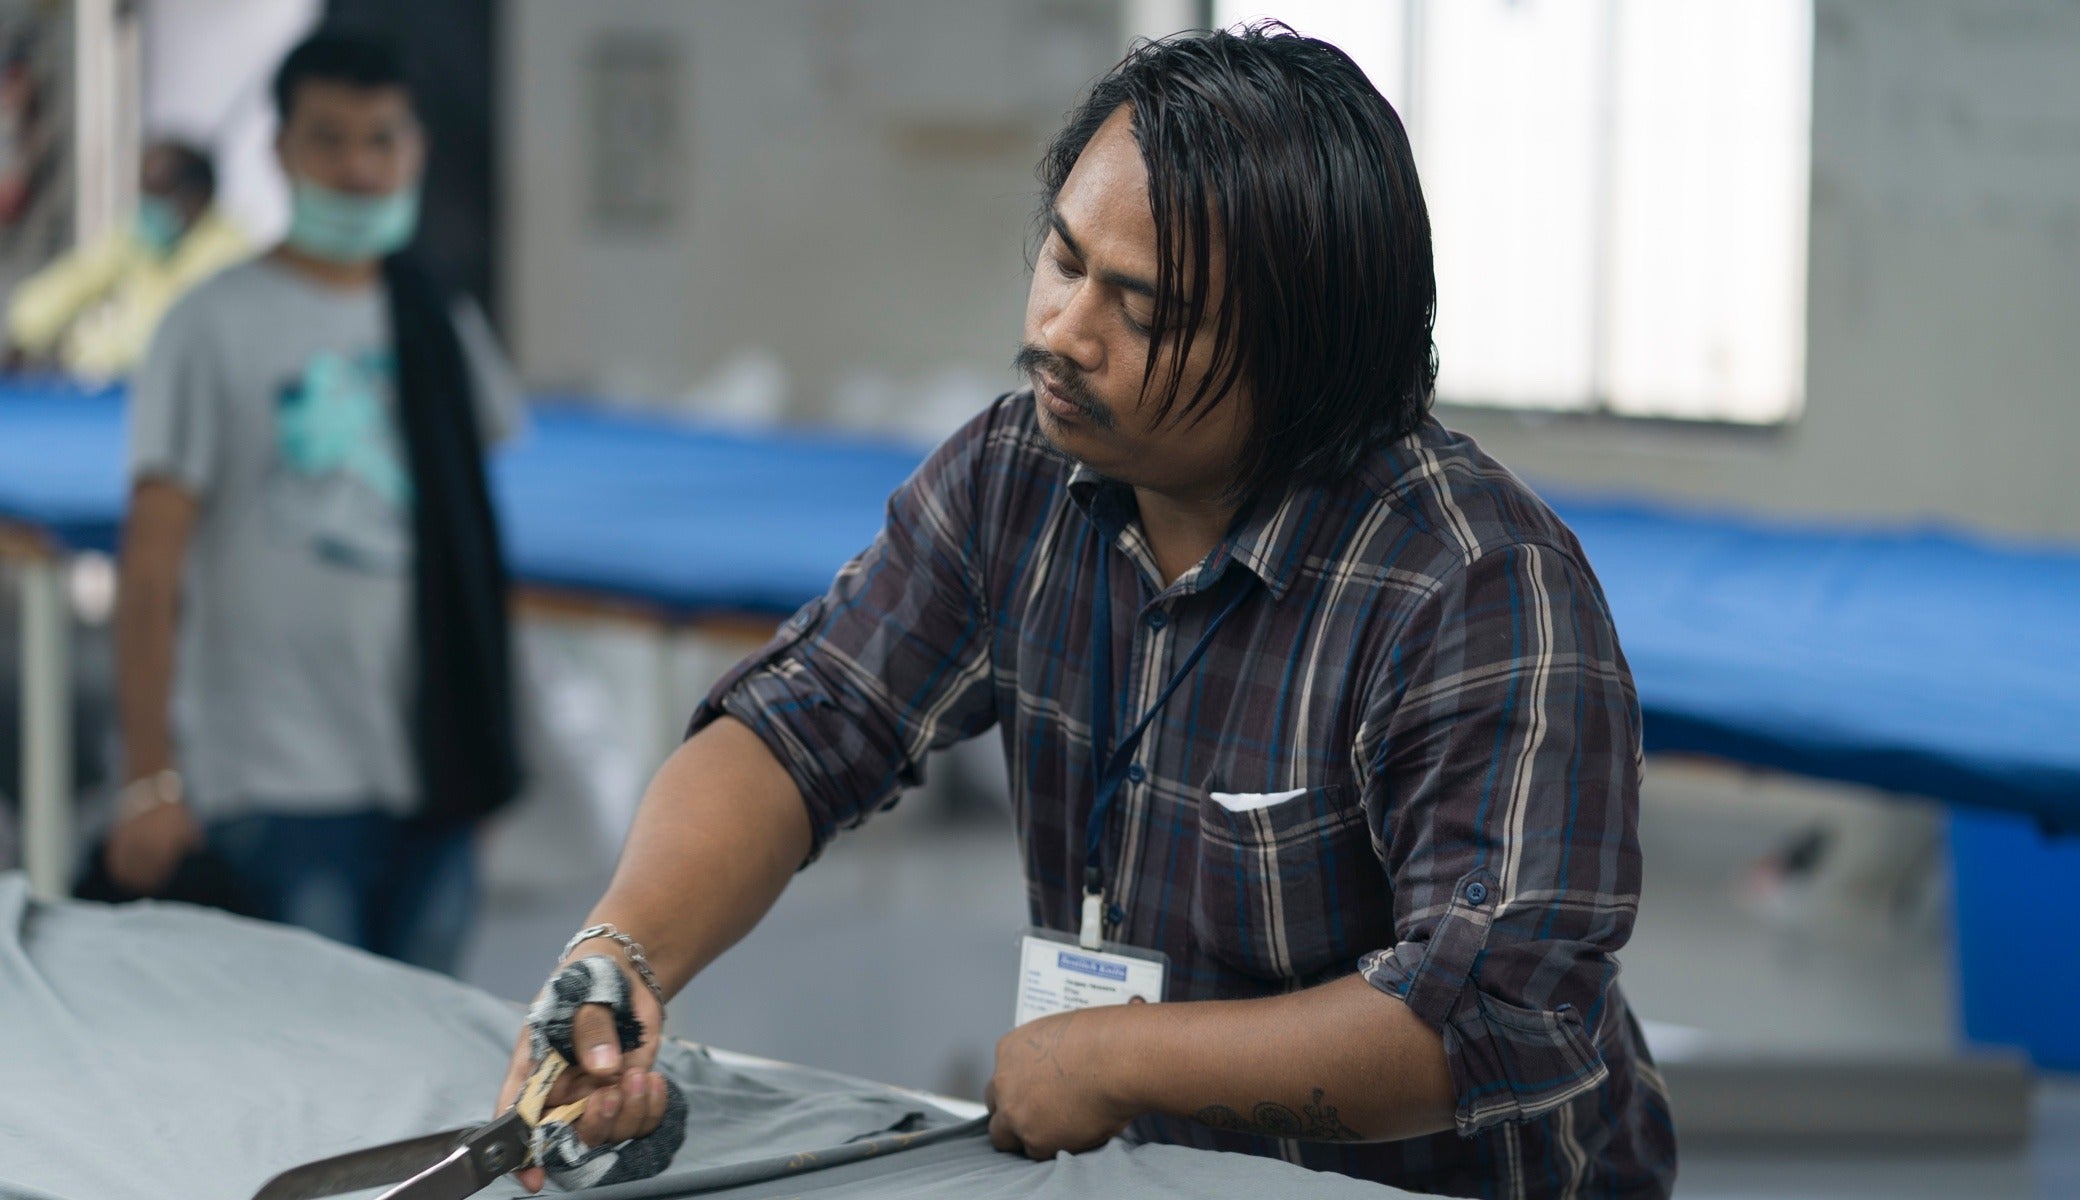 Soibam Hemanta Singh is a material cutter and part of the Fair Trade committee.